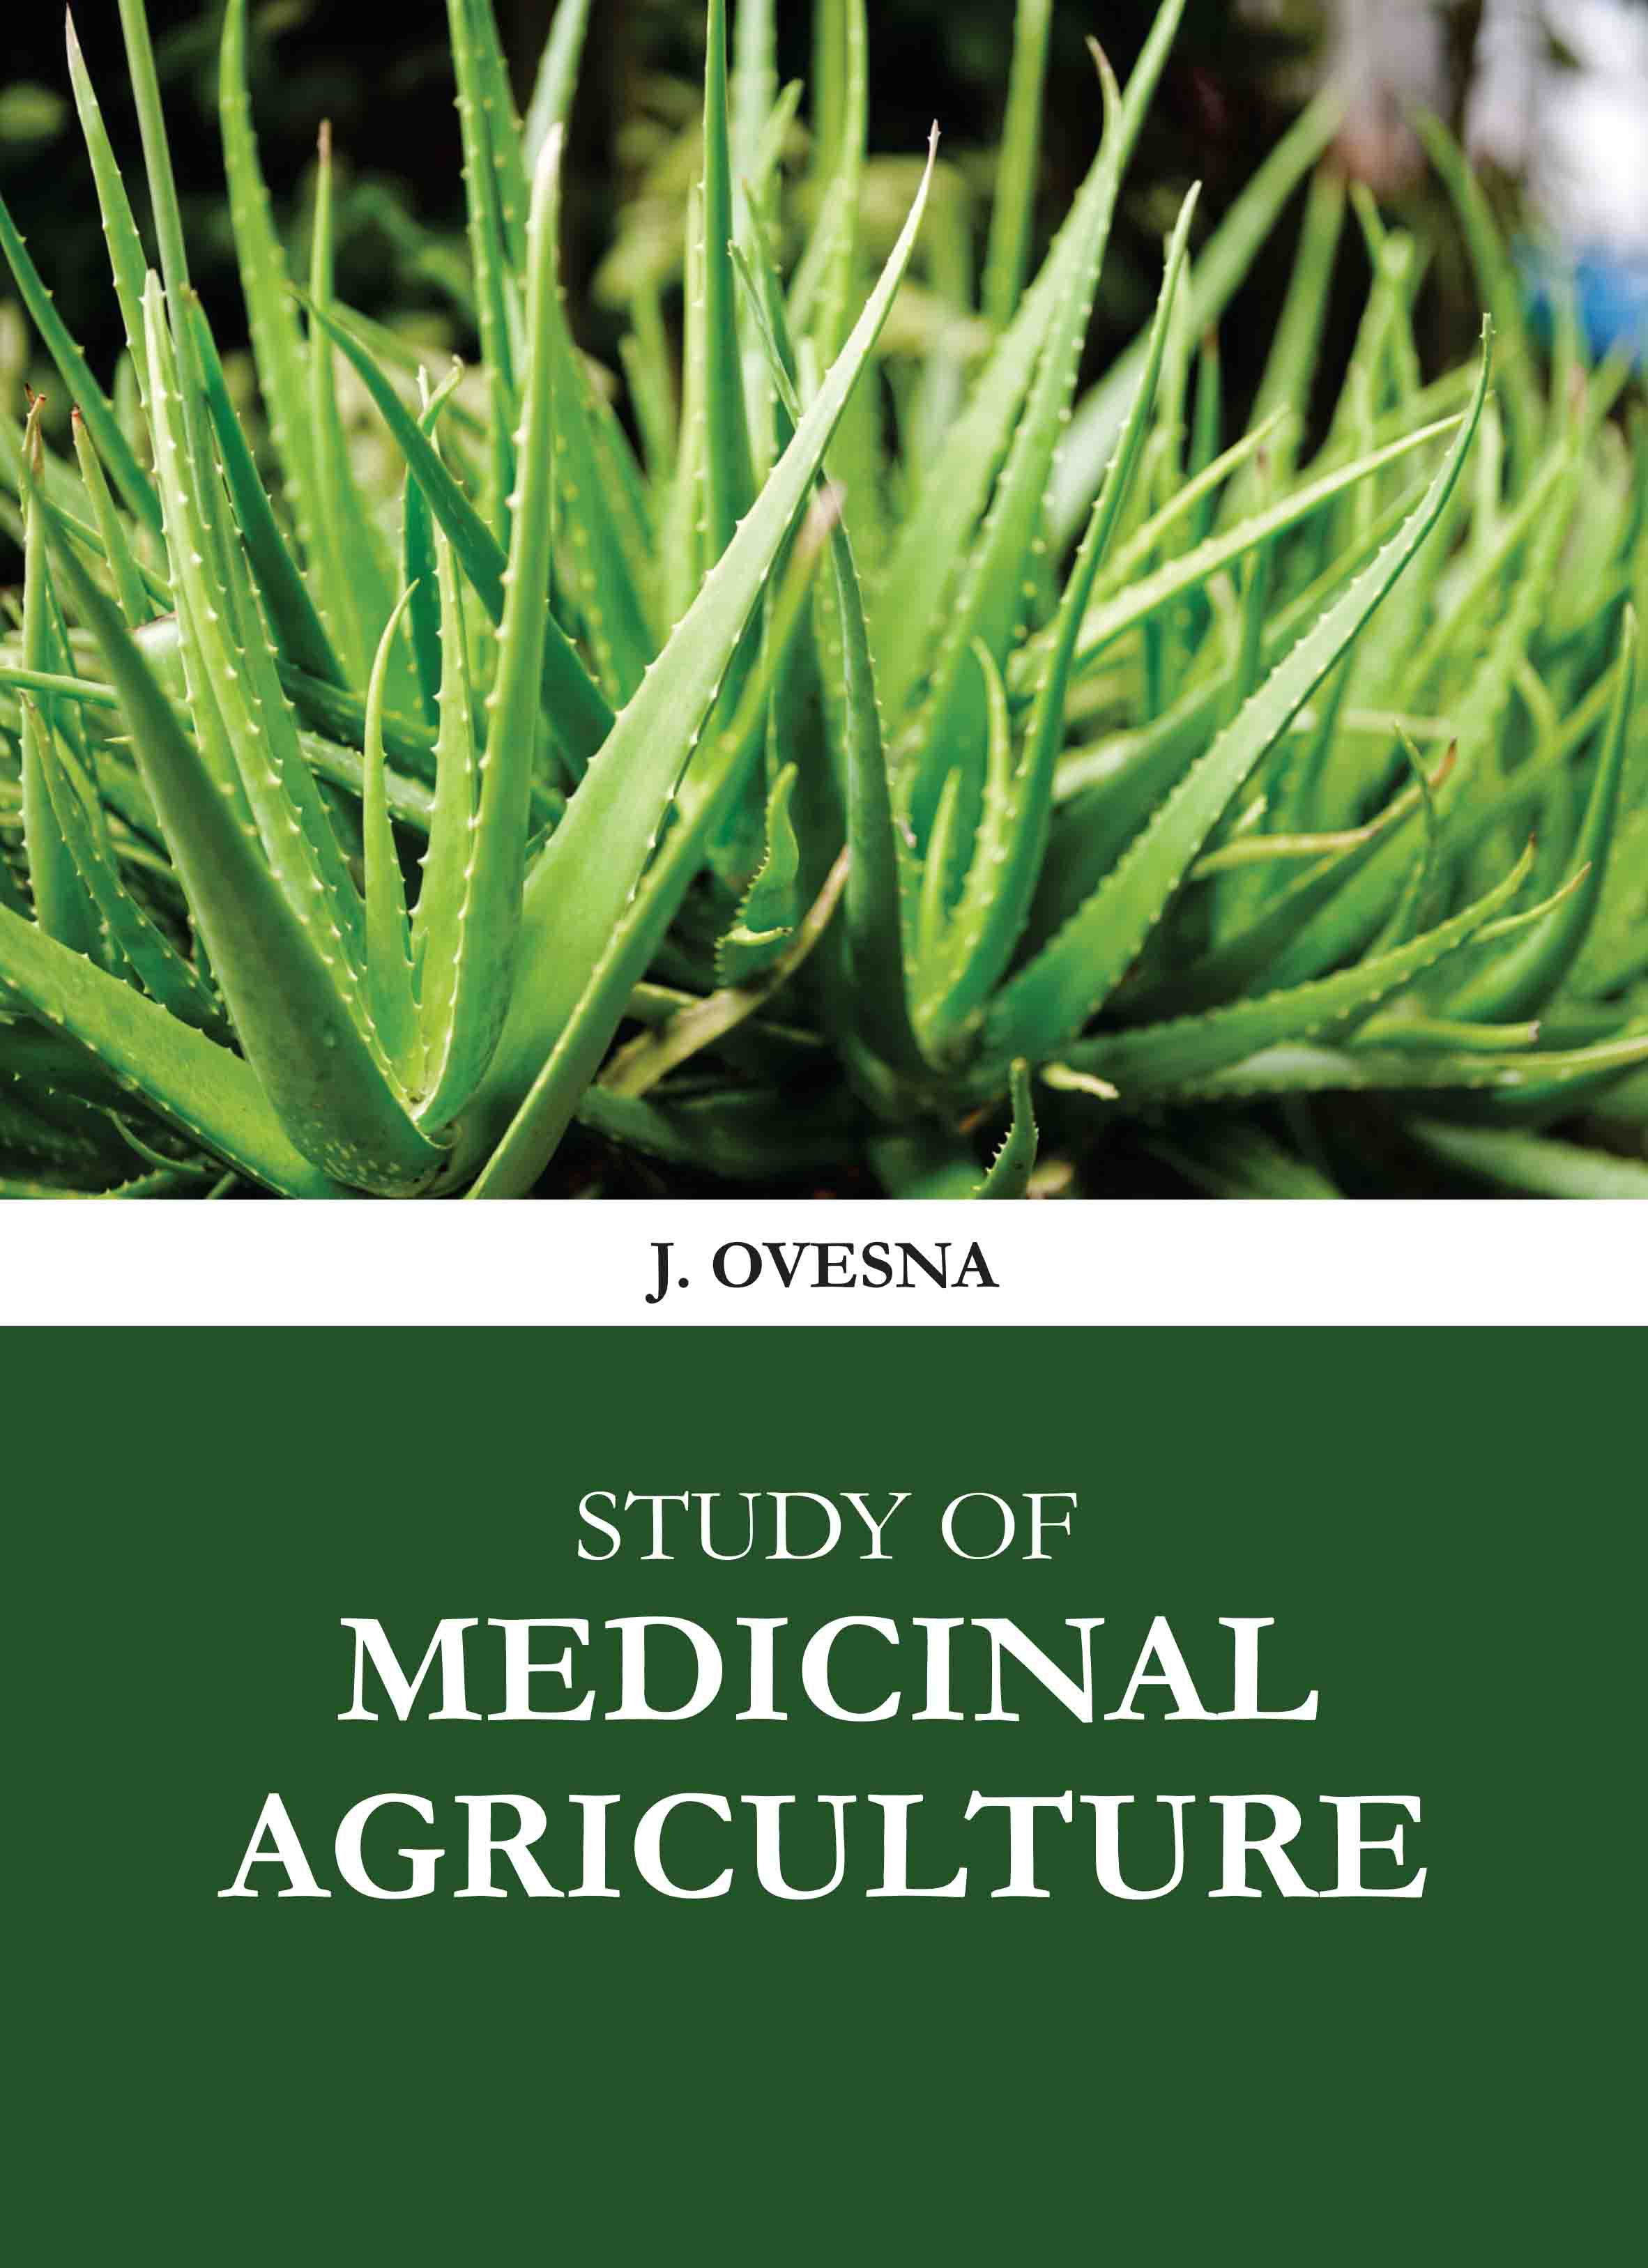 Study of Medicinal Agriculture